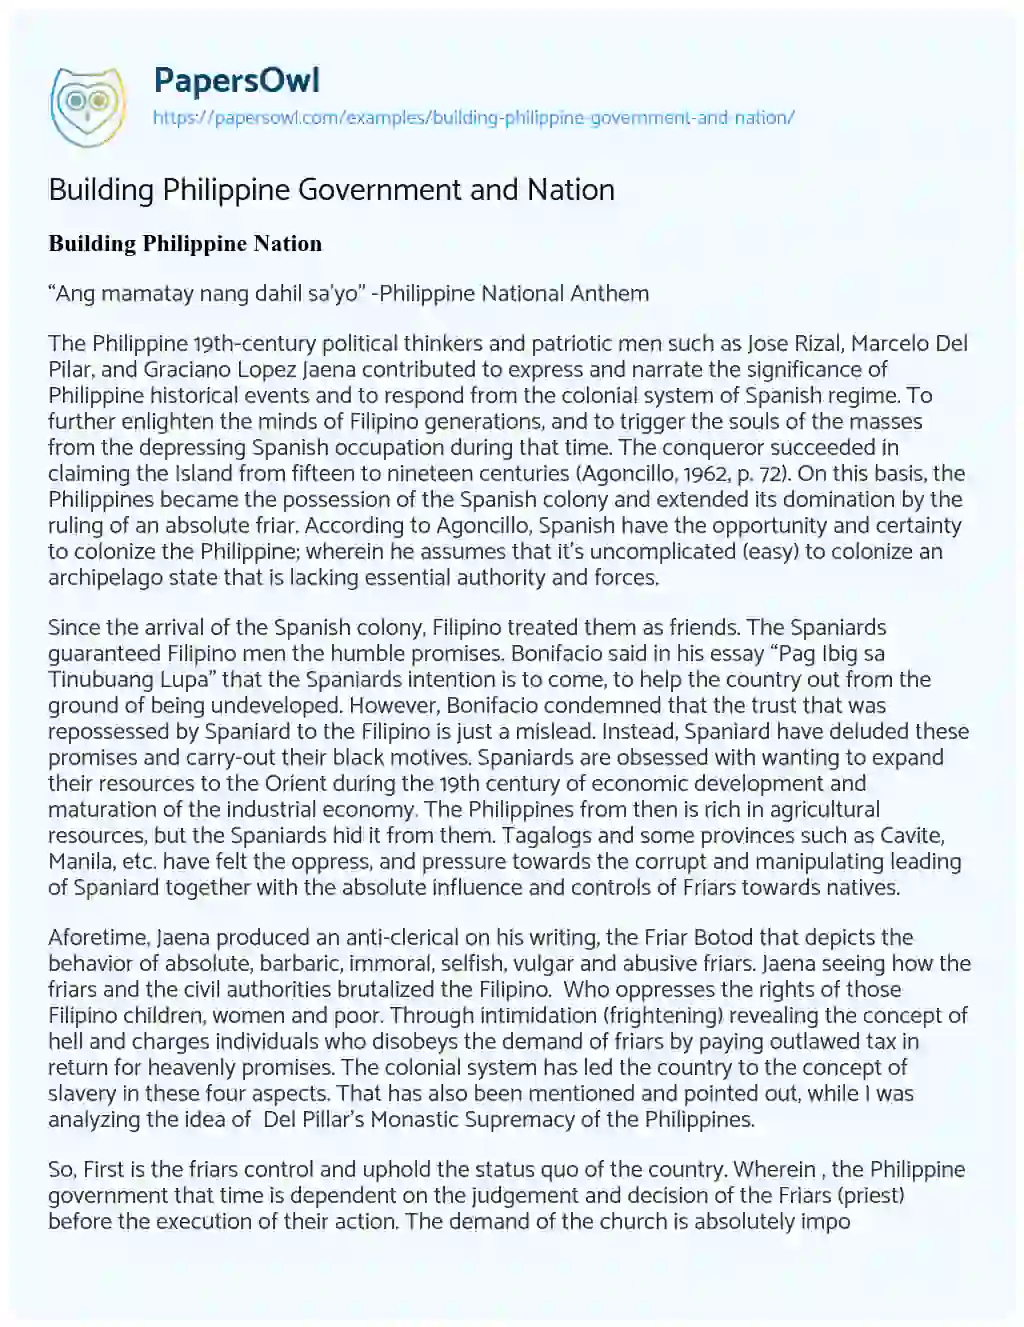 Essay on Building Philippine Government and Nation